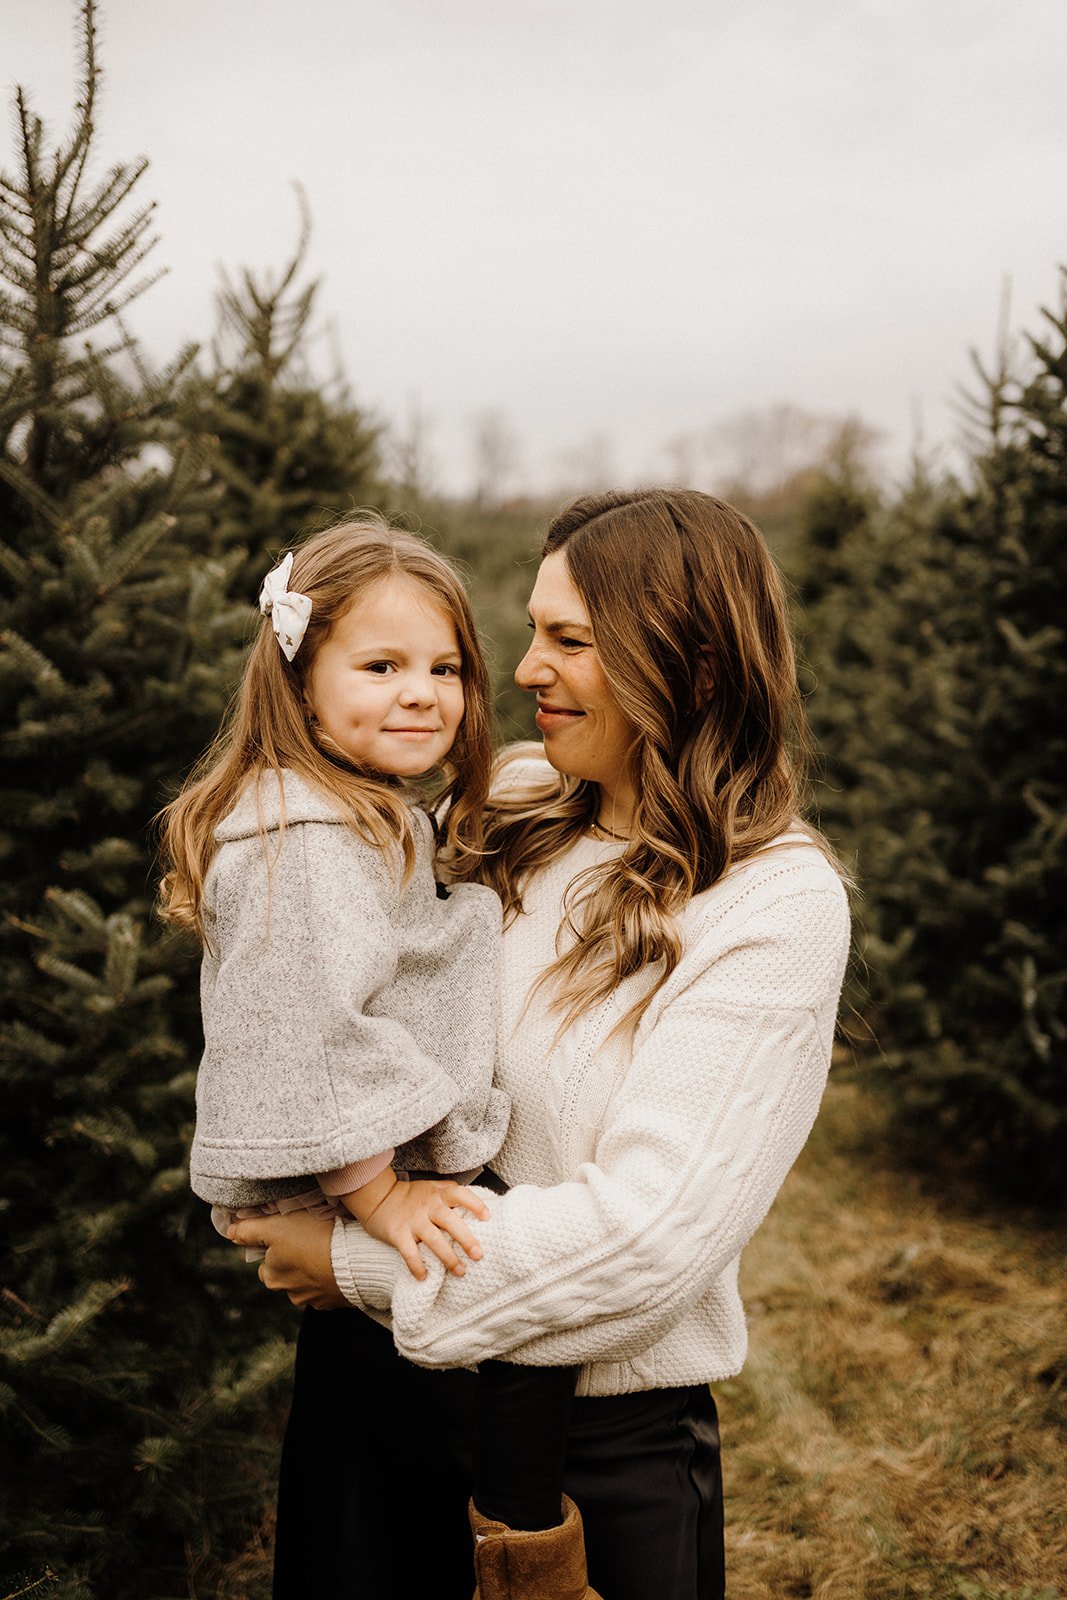 A mother holding her daughter in her arms in front of Christmas Trees.